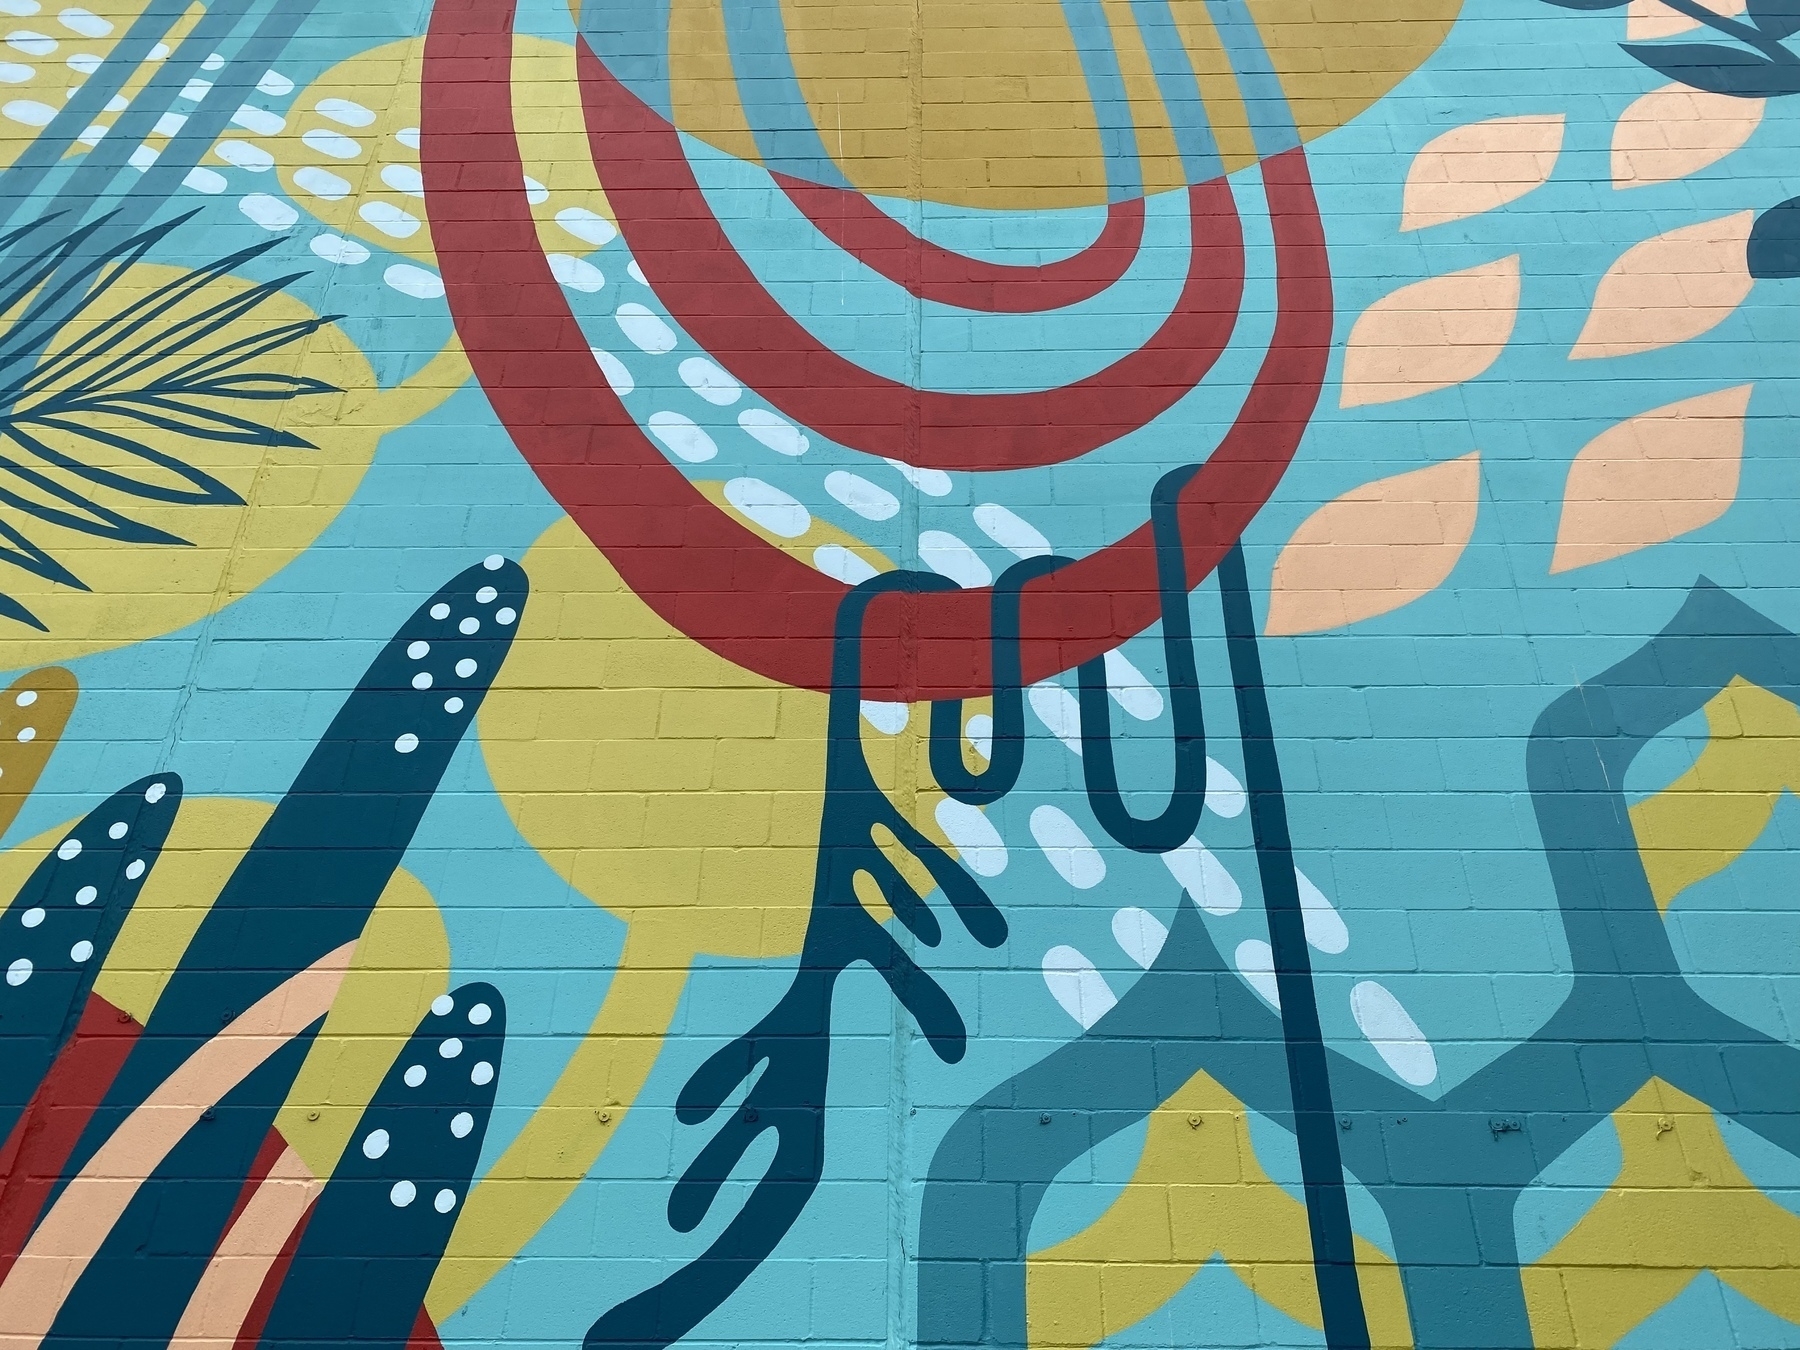 Mural on the side of a building of abstract shapes and colors.